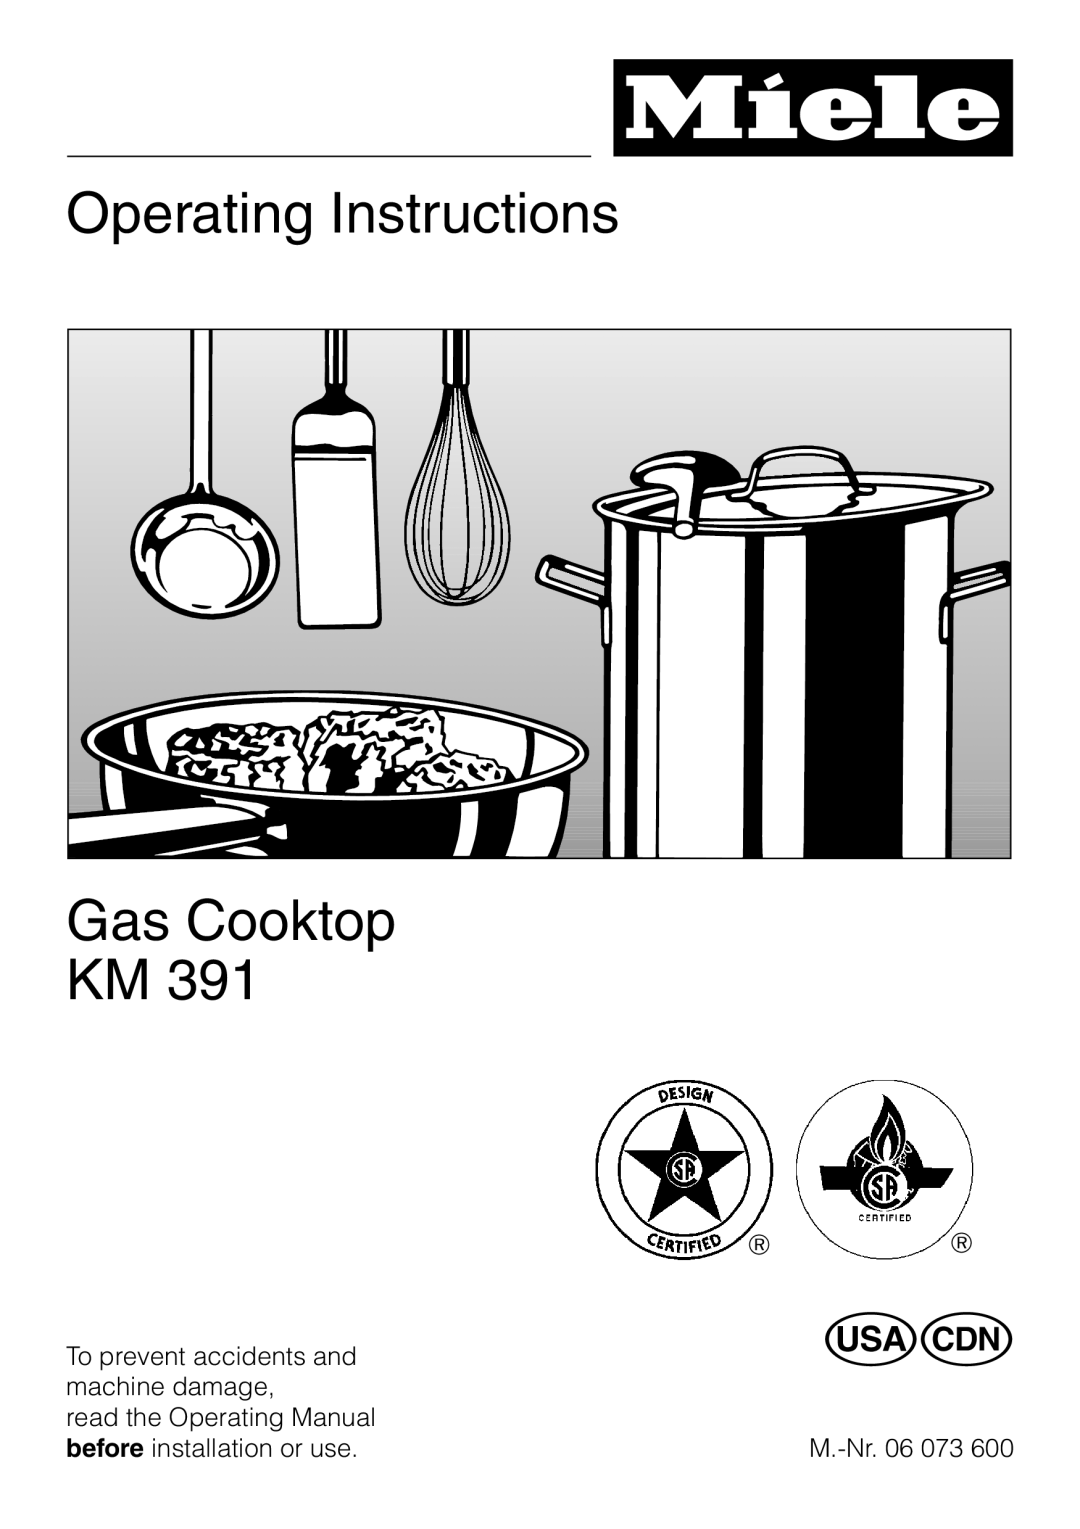 Miele KM 391 manual Operating Instructions Gas Cooktop KM 